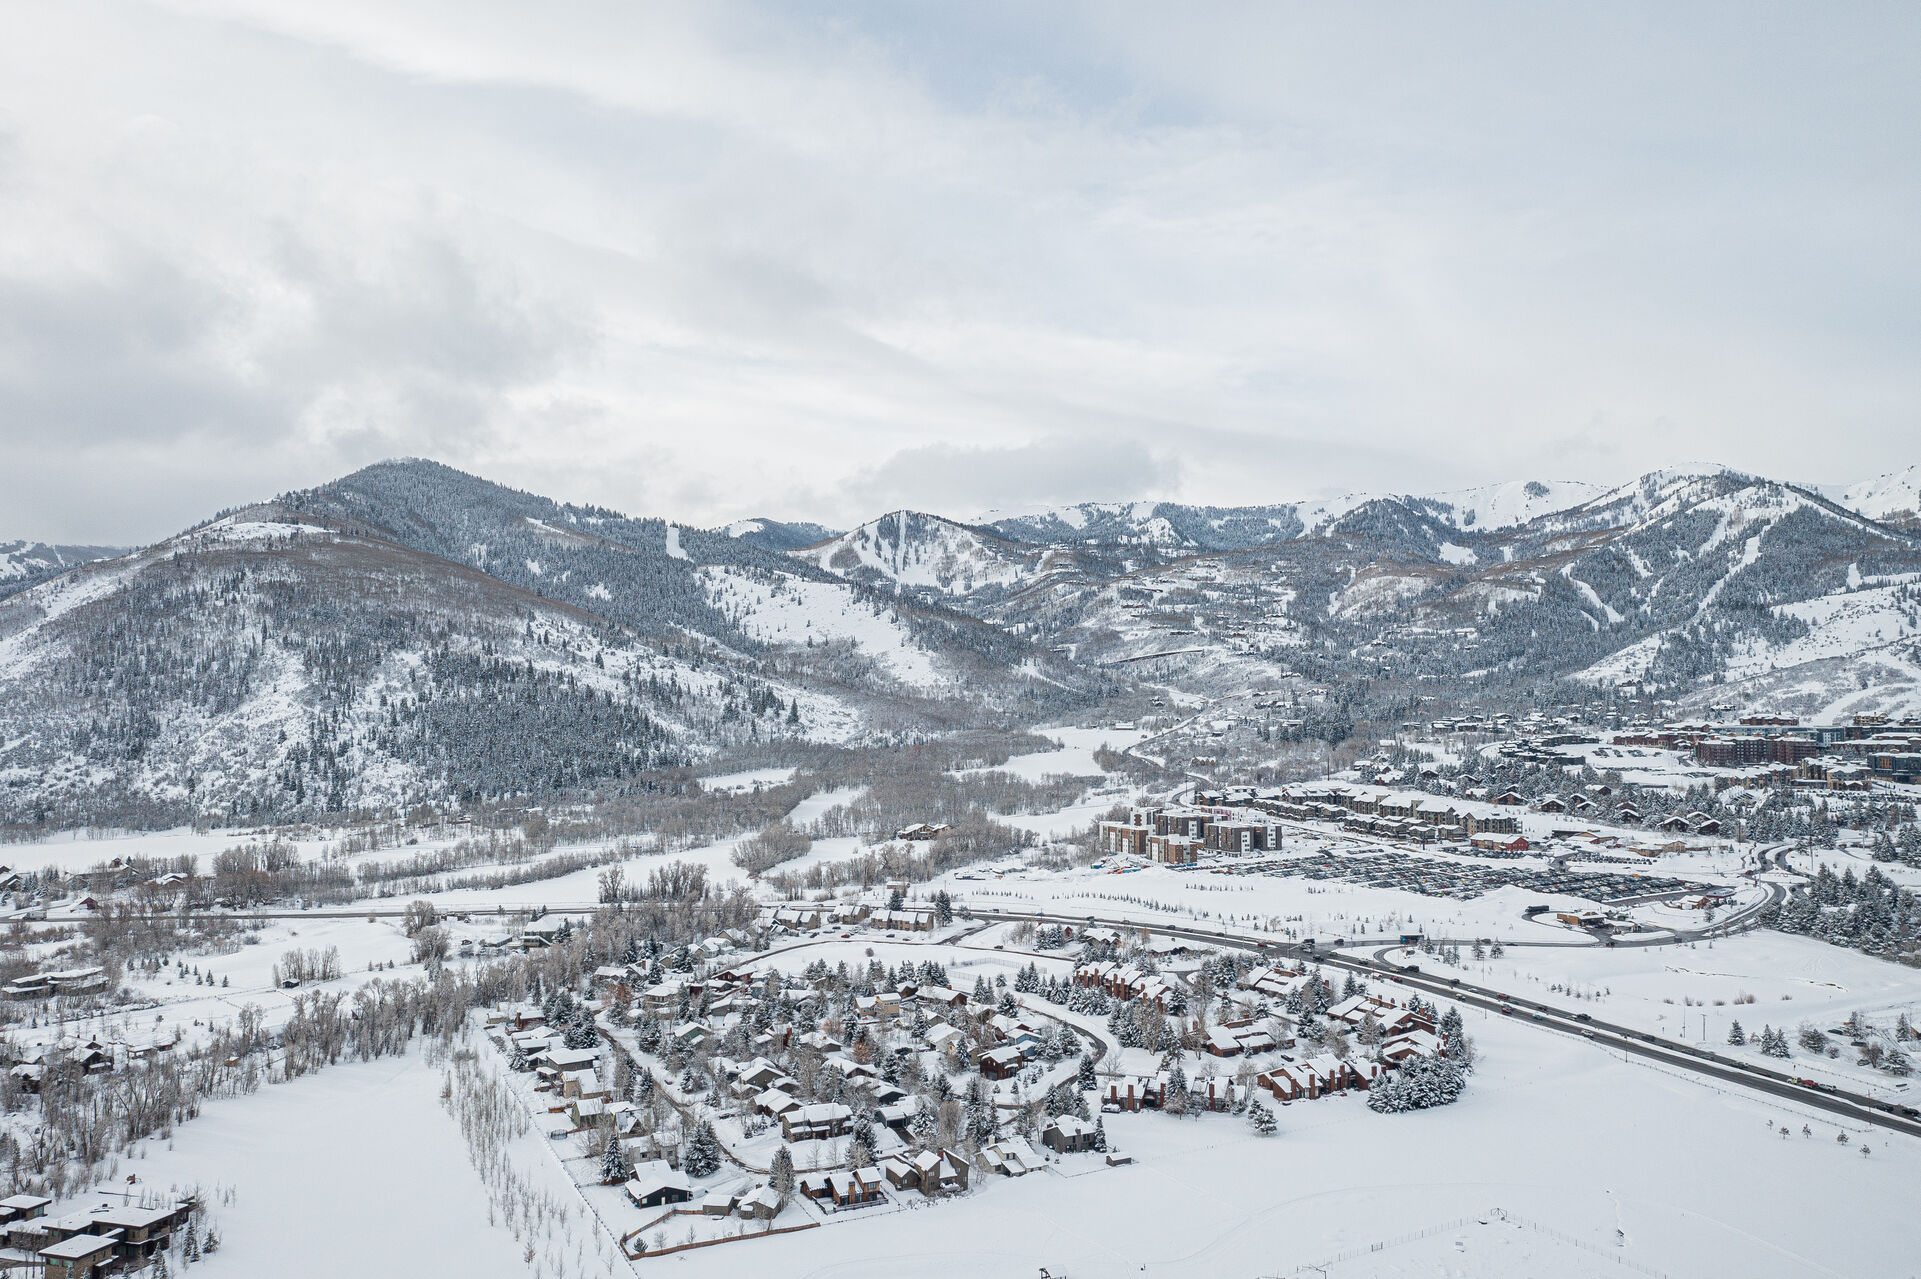 Home is located in the beautiful Park City Canyons Area